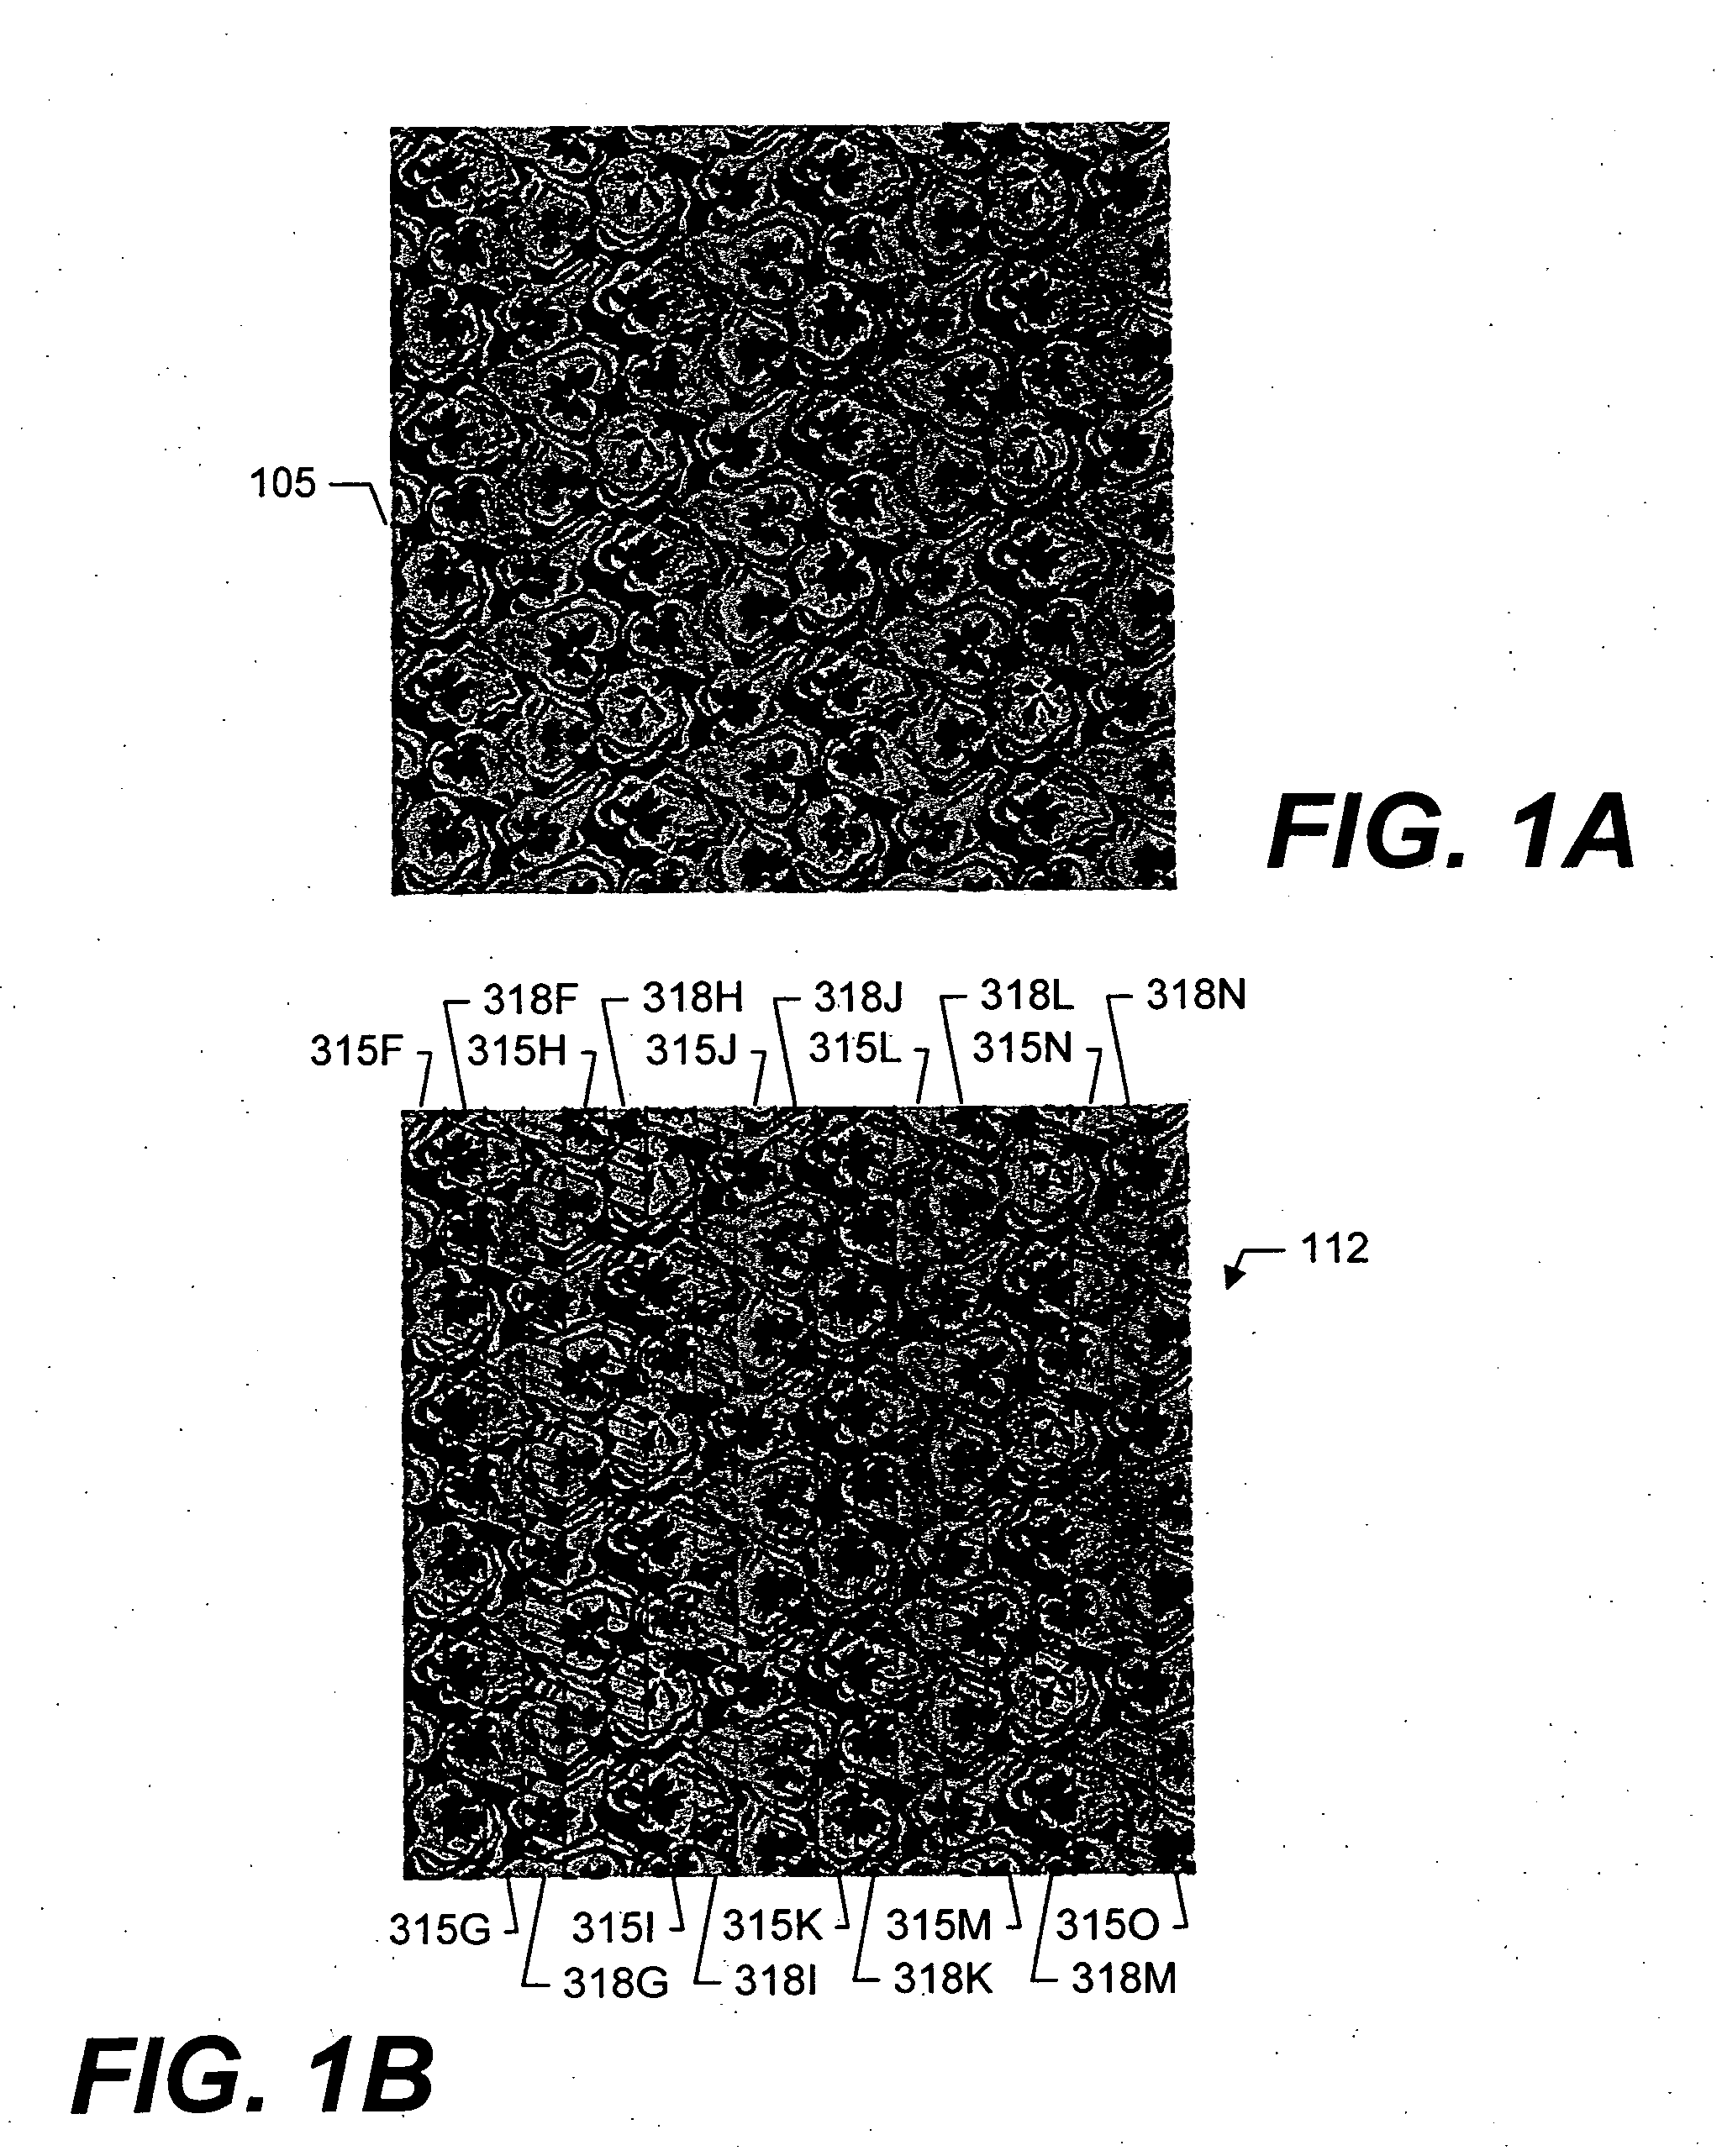 System and method of producing multi-colored carpets